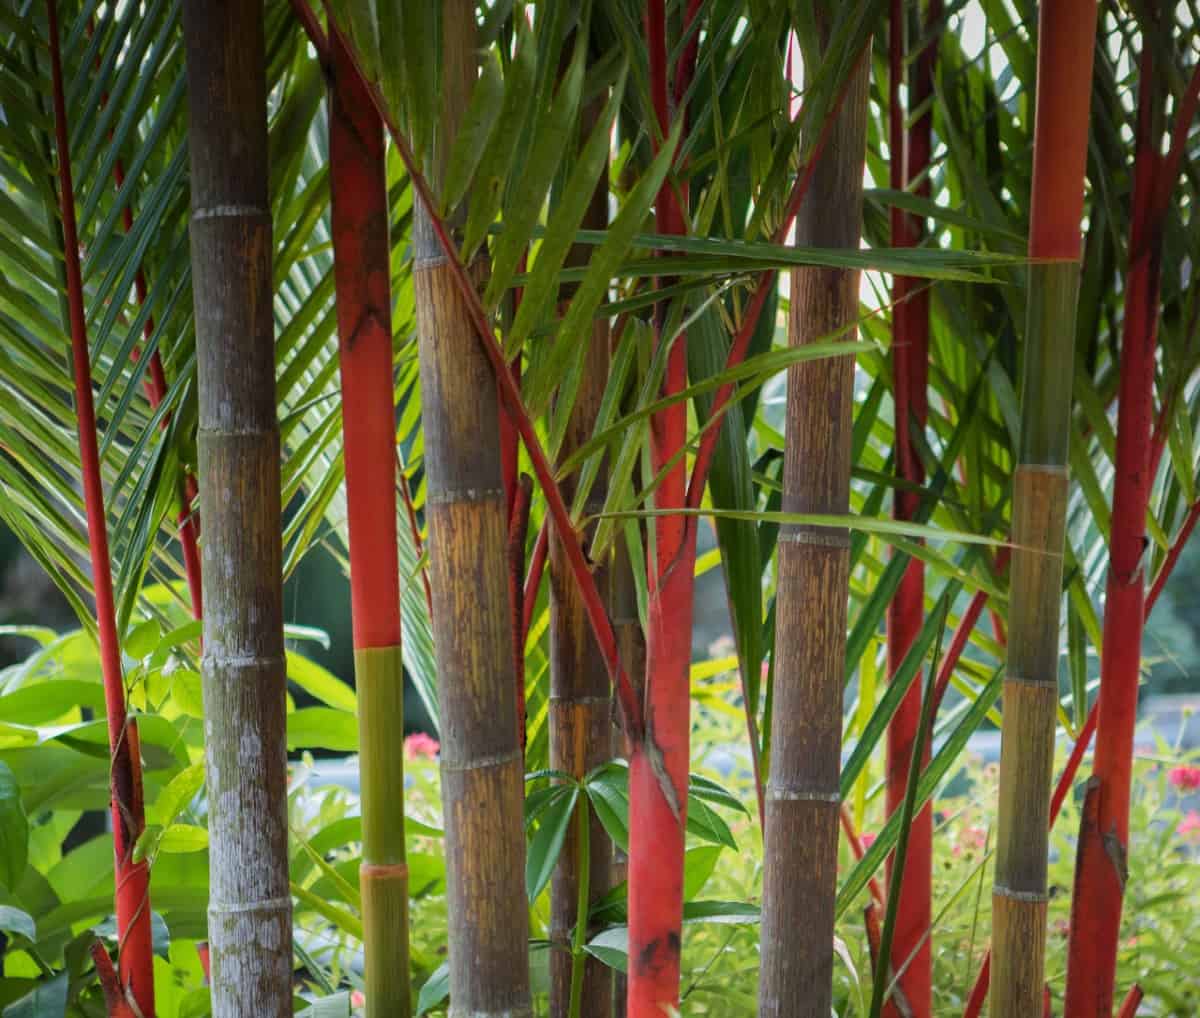 Lipstick bamboo or lipstick palm is not actually a bamboo plant.